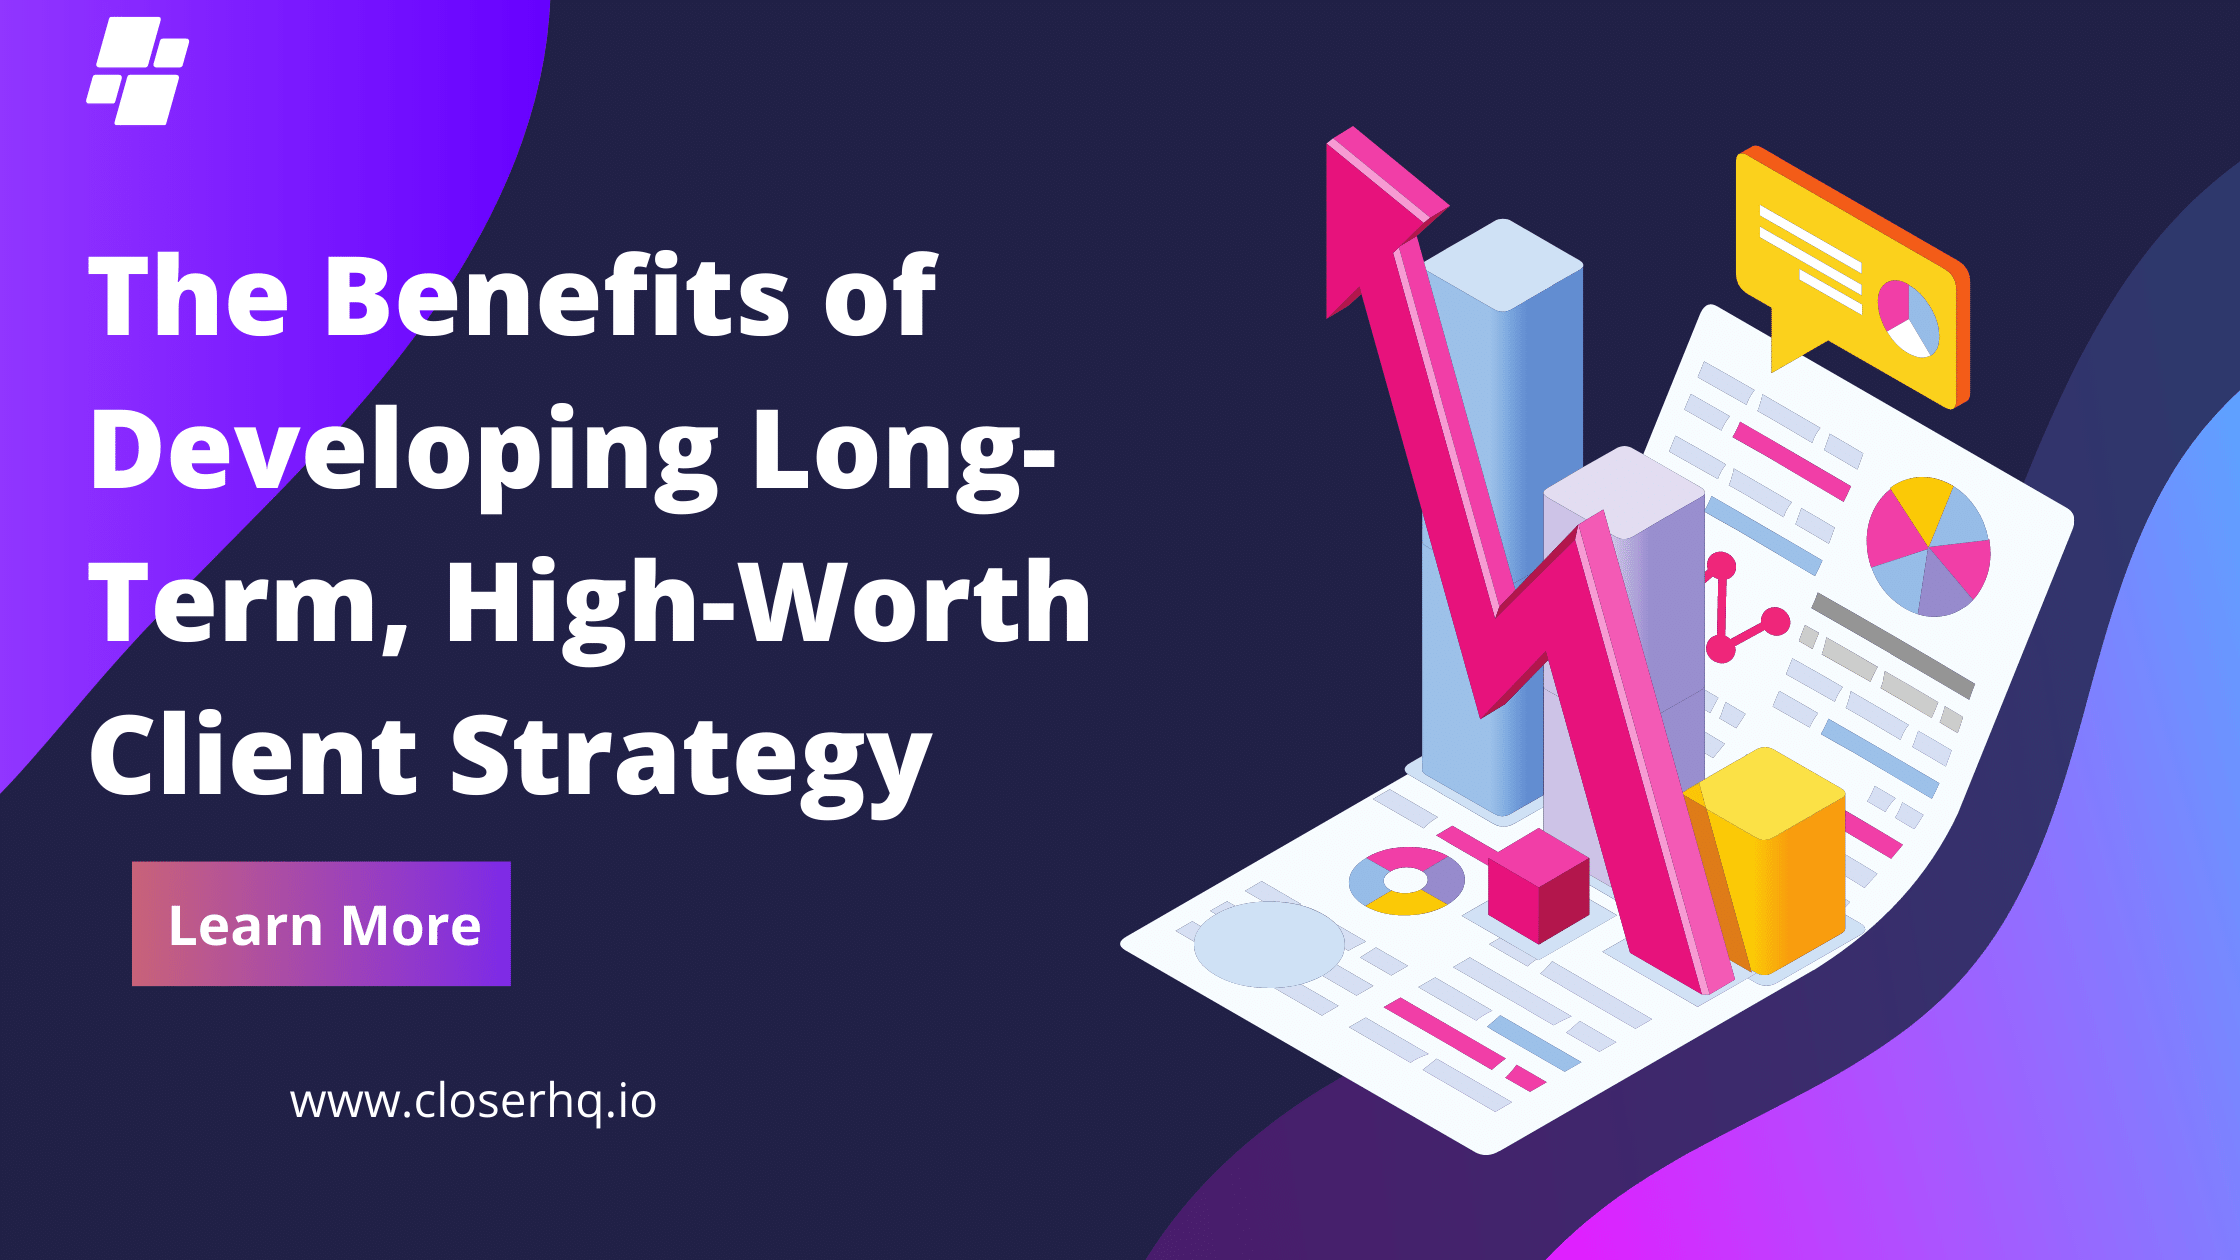 Advantages of Developing Long-term, High-worth Client Strategy